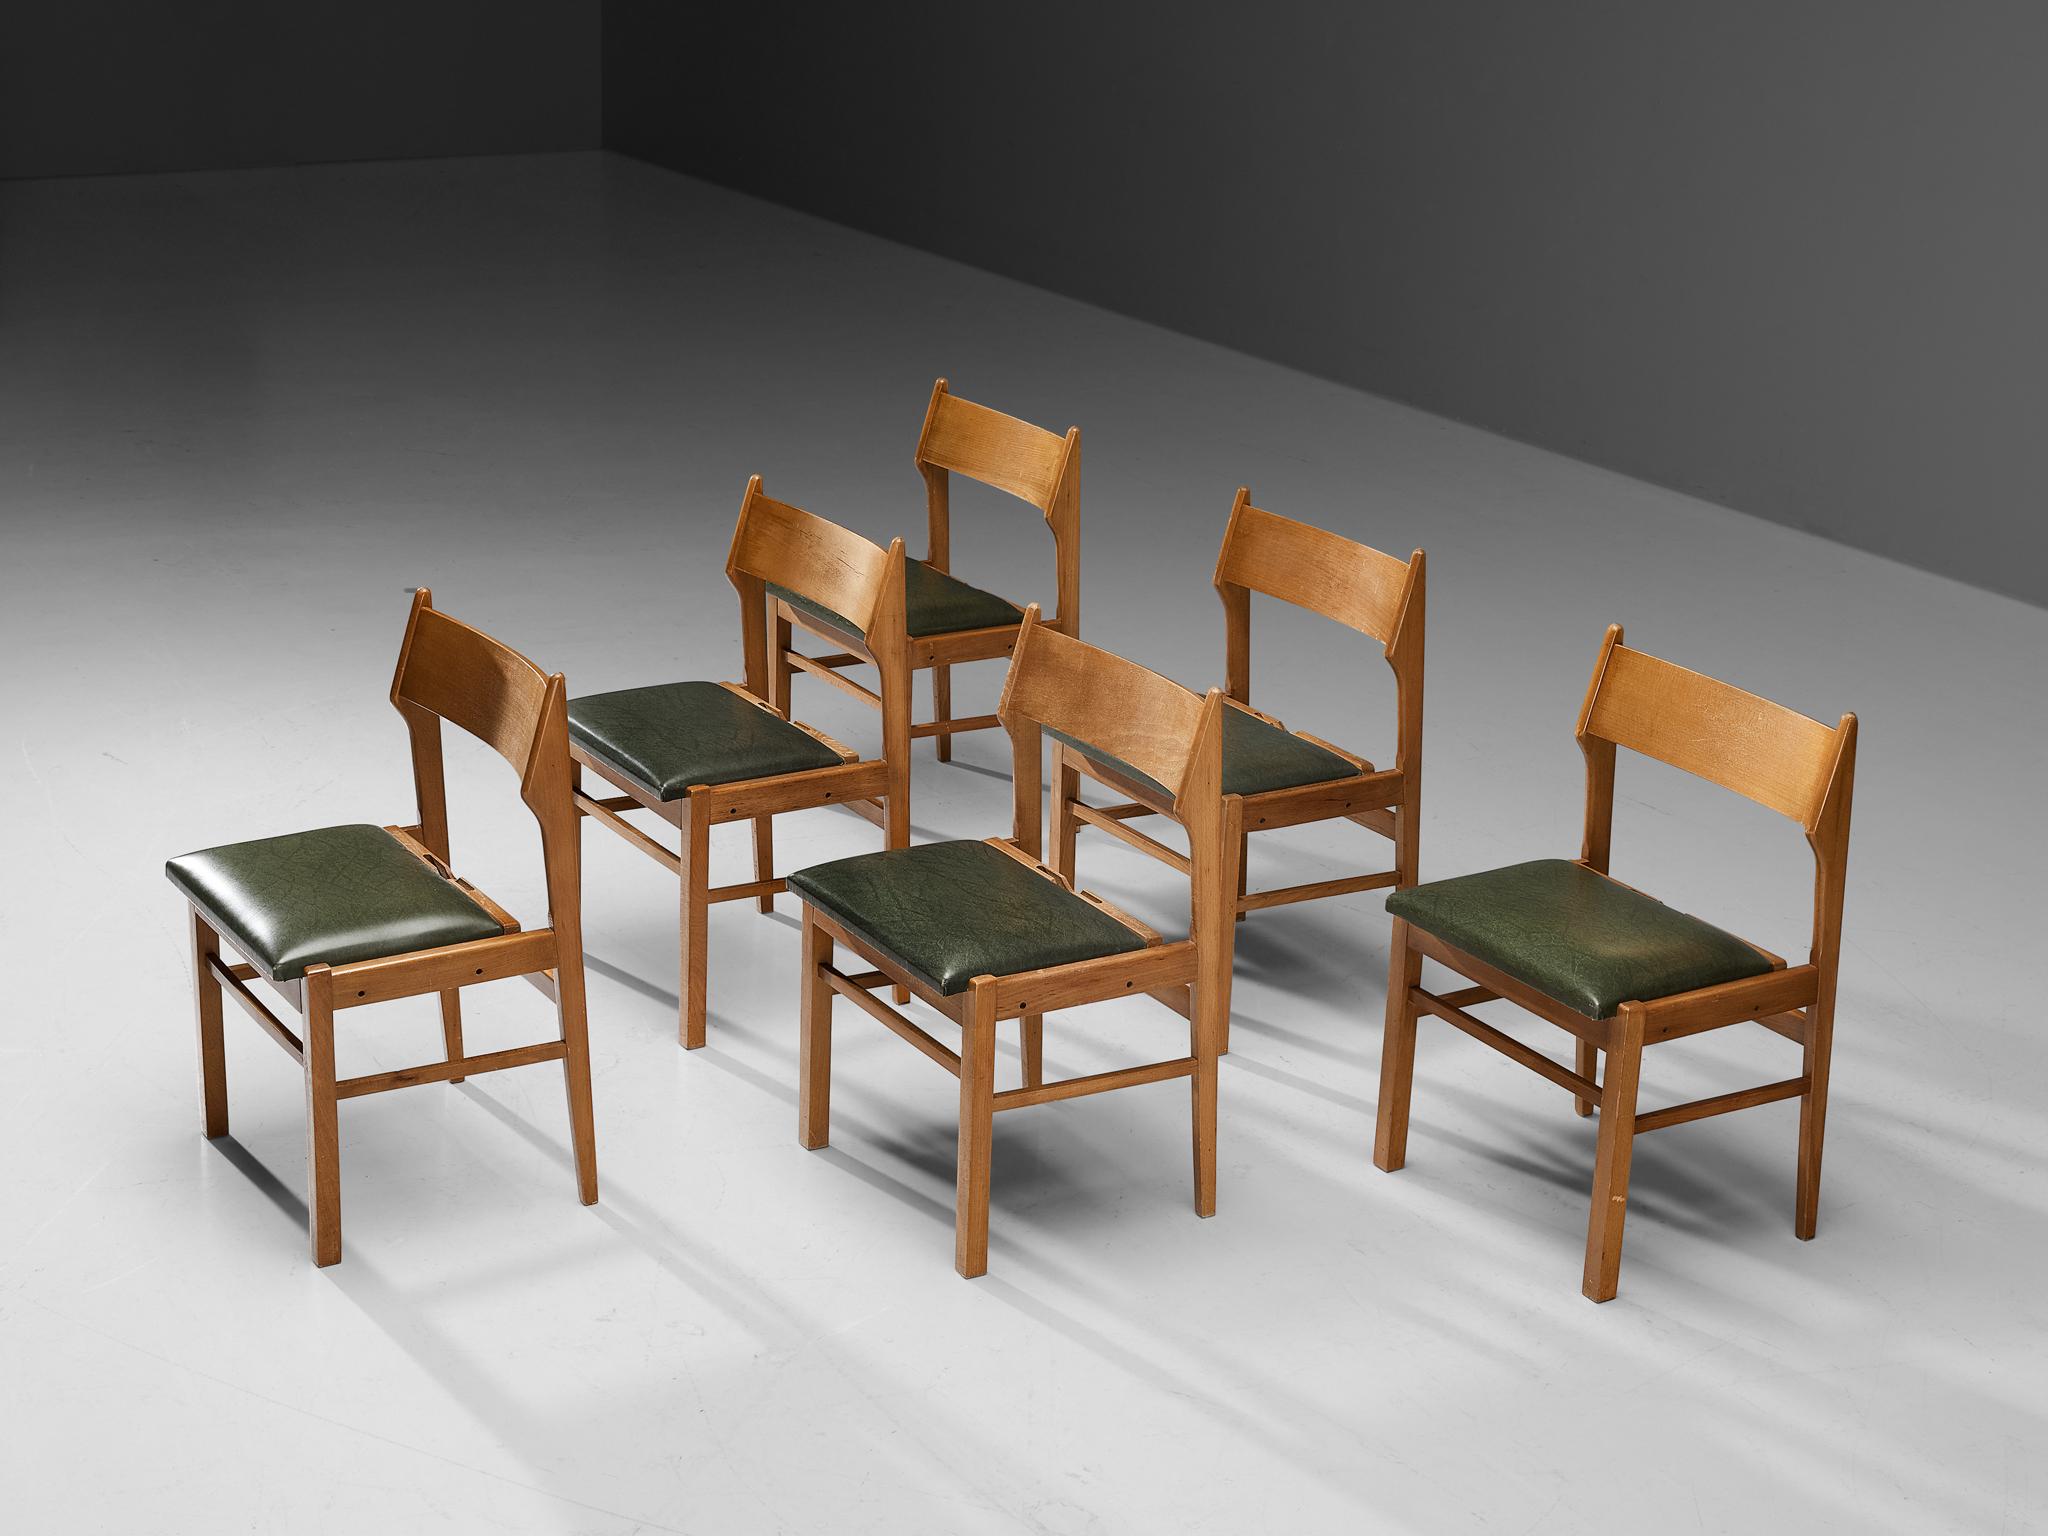 Dining chairs, wood, dark green leatherette, The Netherlands, 1960s. 

Modest set of six dining chairs. Its design shows clear lines and an open backseat. The dark green leatherette seats give a striking contrast with the warm color of the wooden